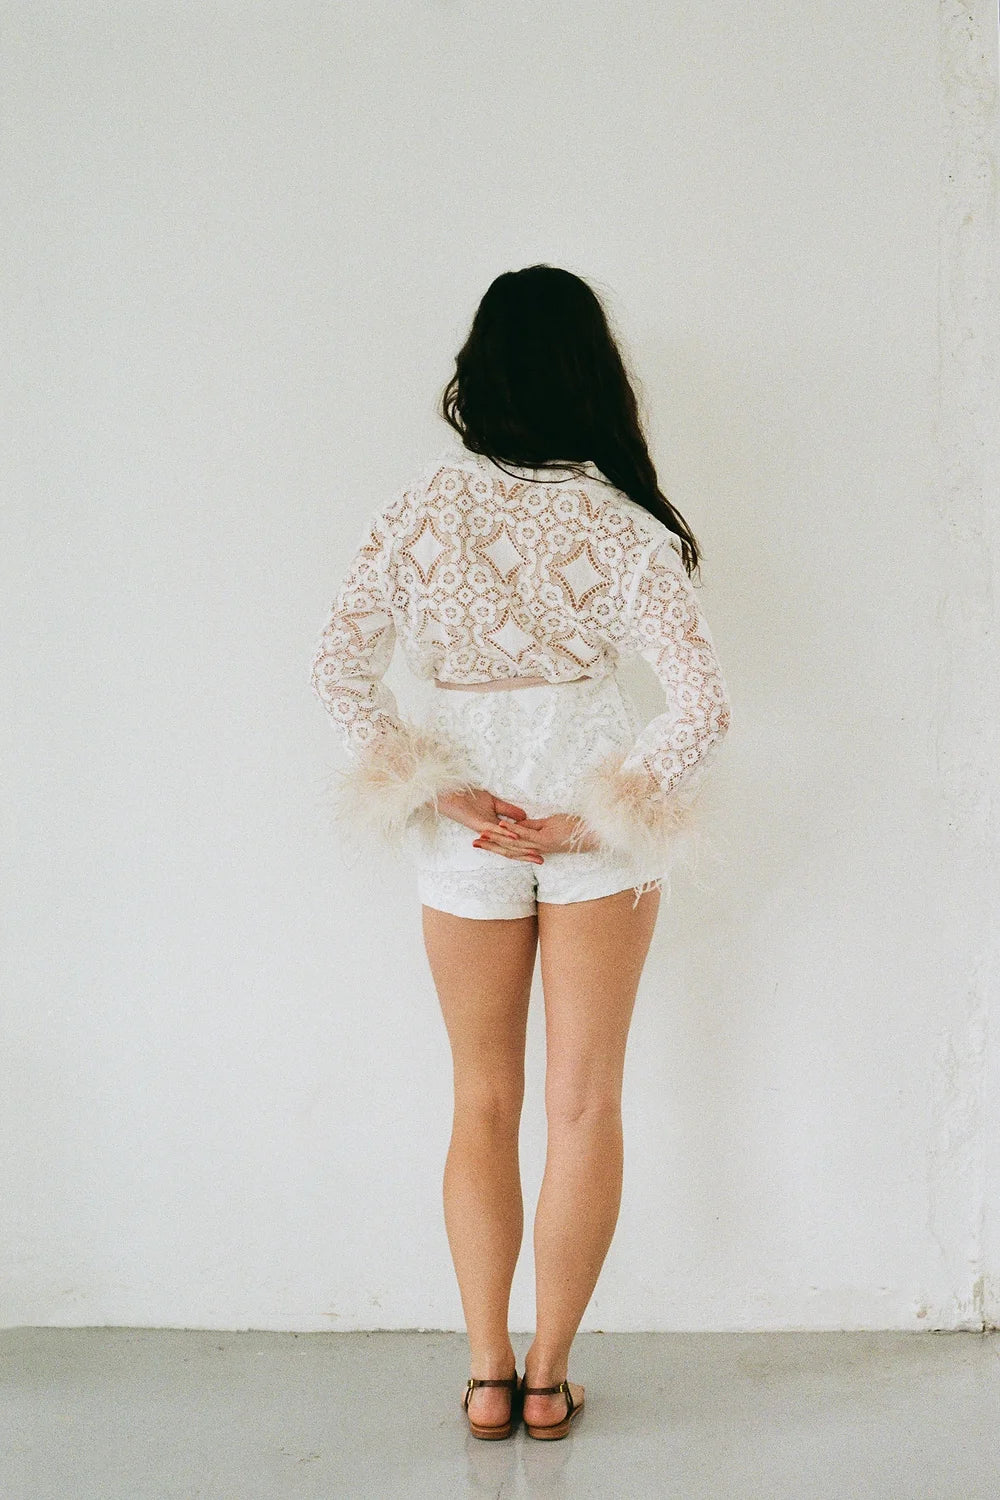 Forever Cluny Lace Fluff Jacket